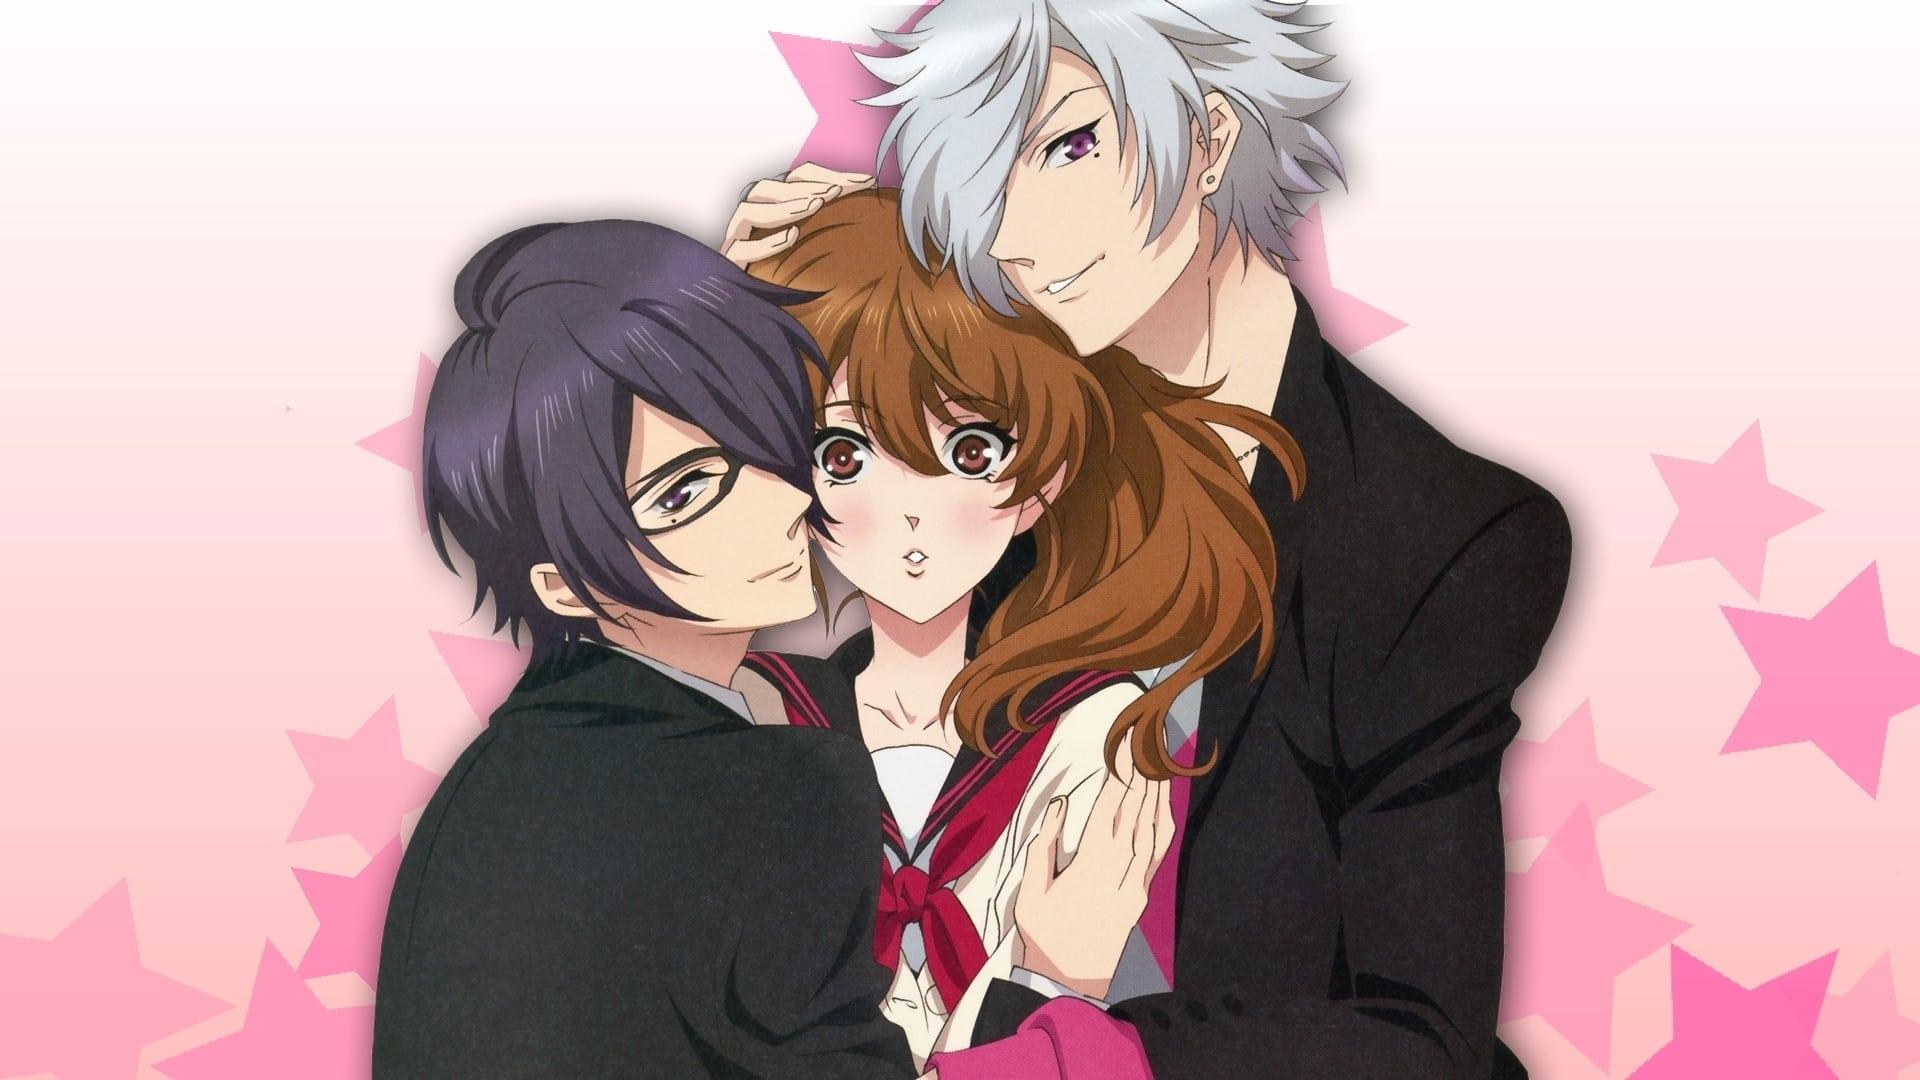 Brothers Conflict backdrop